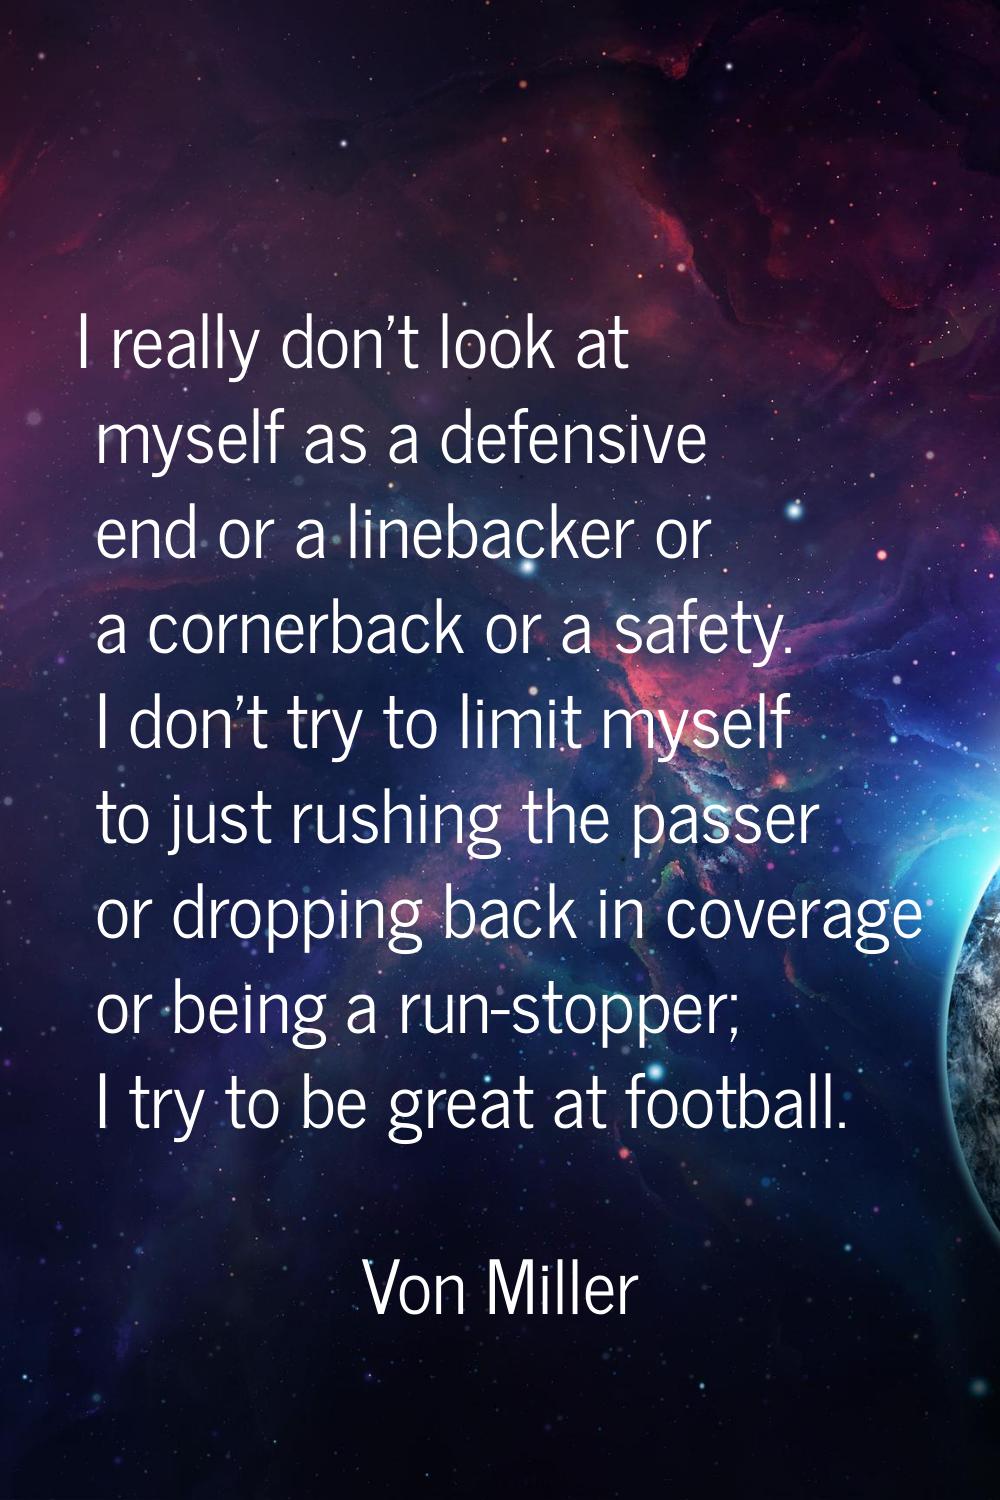 I really don't look at myself as a defensive end or a linebacker or a cornerback or a safety. I don